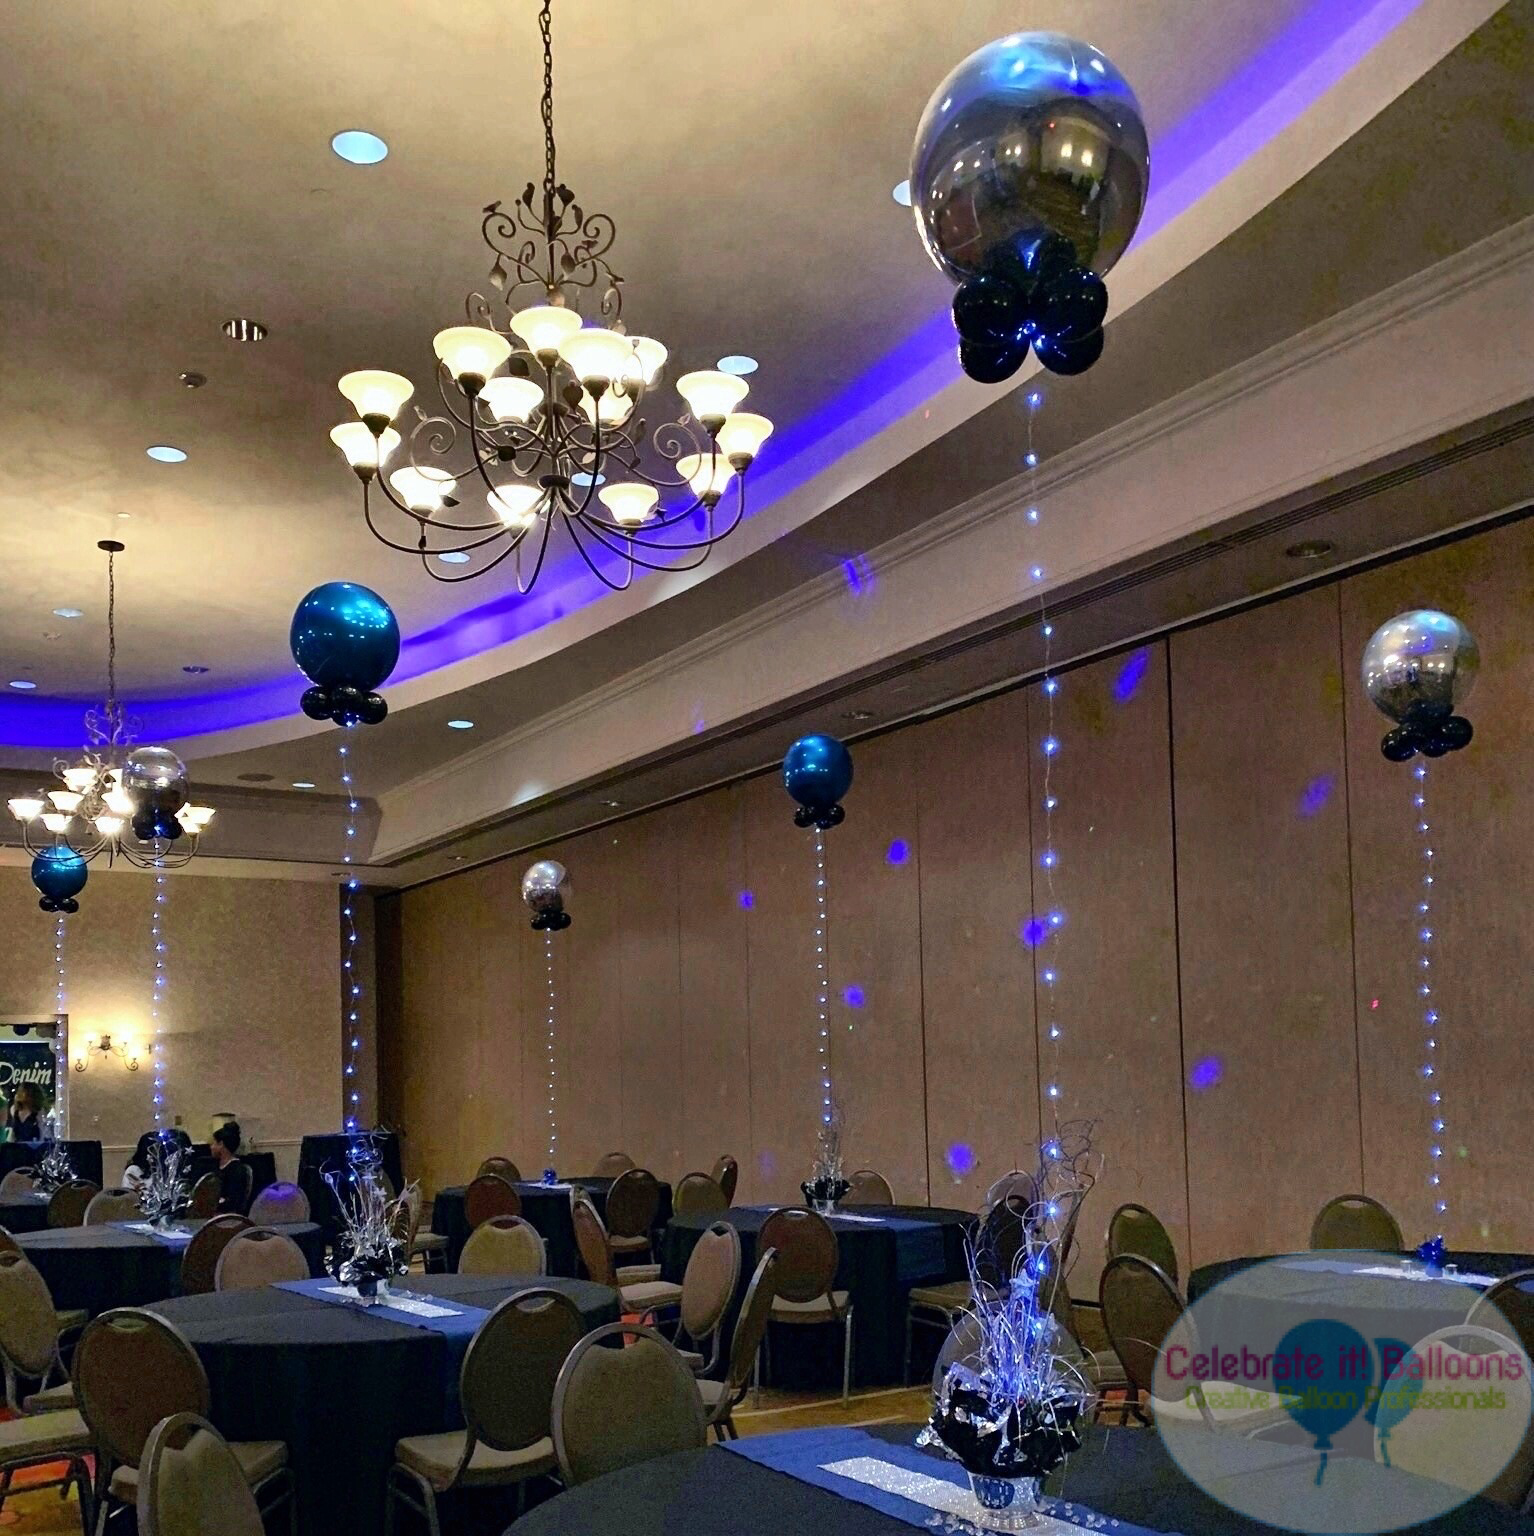 Orbz tall balloon centerpieces with light strands